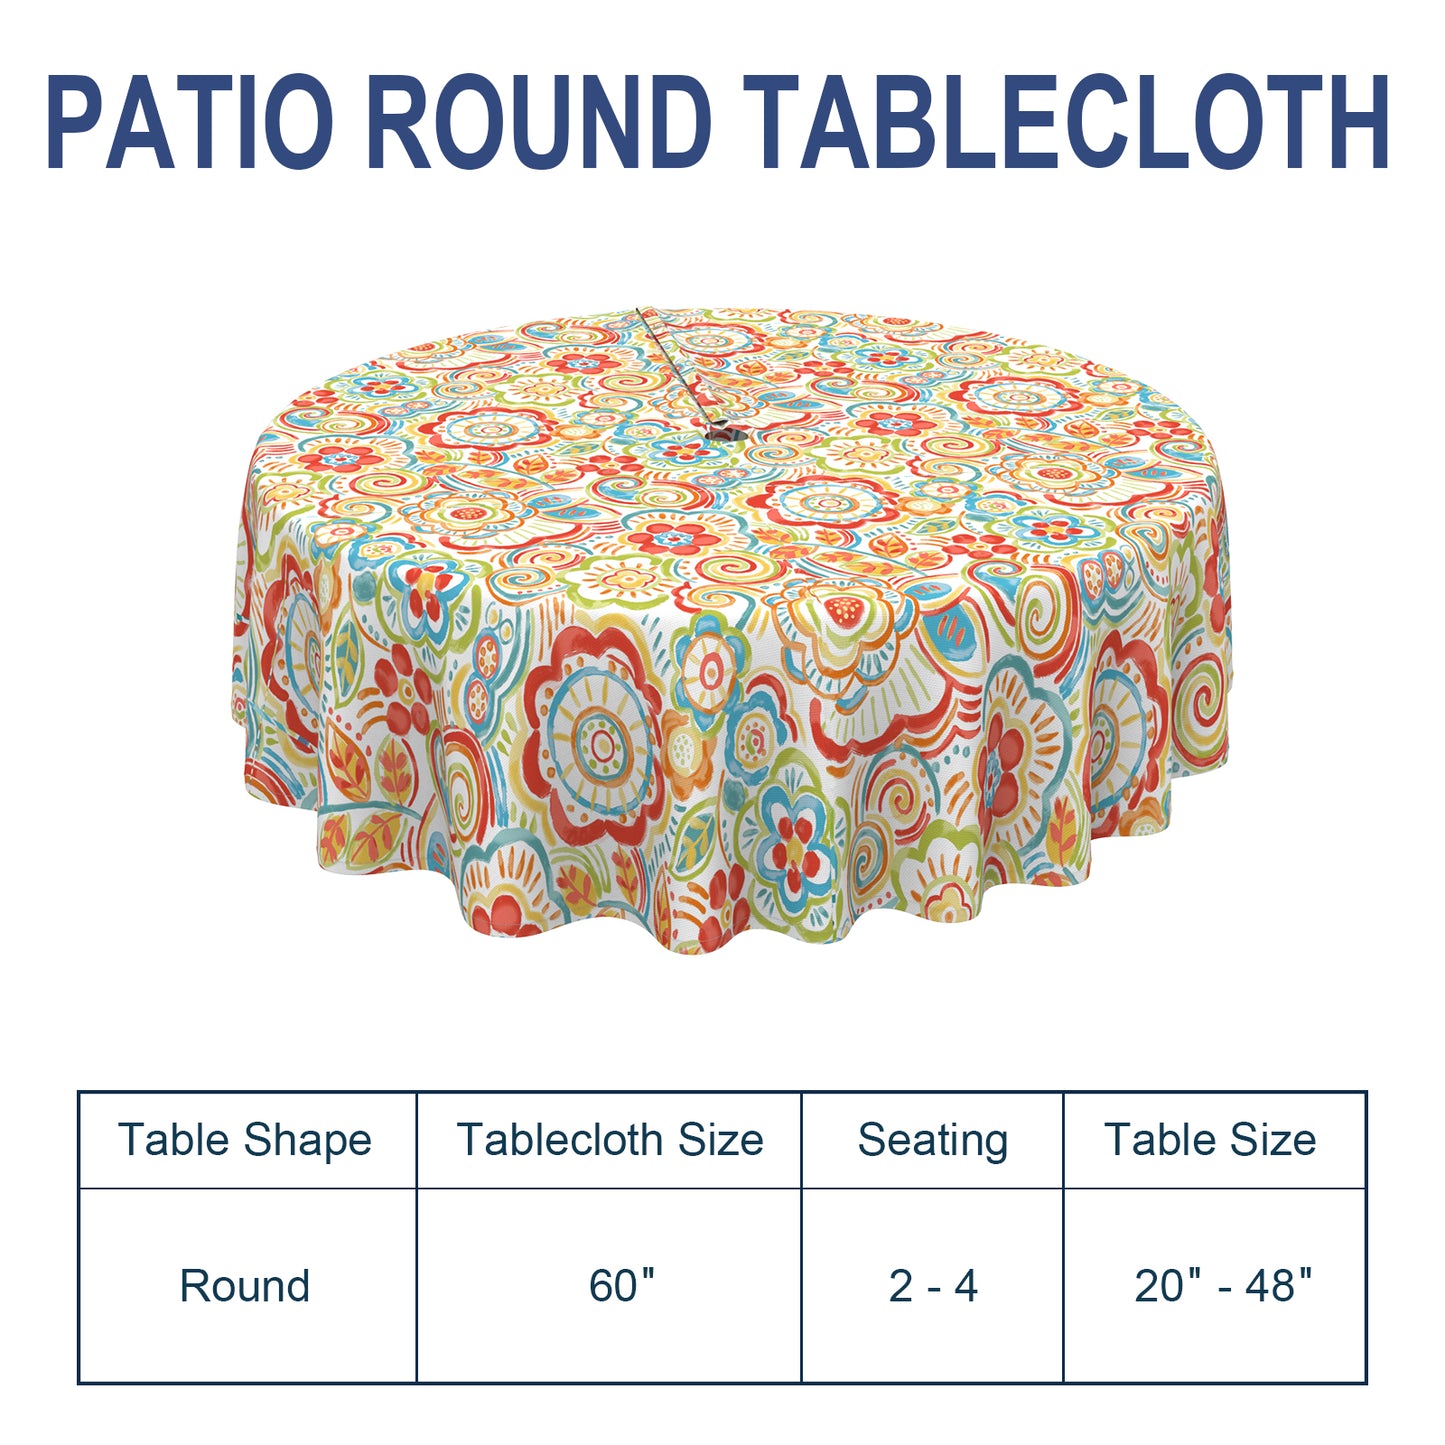 Melody Elephant Outdoor/Indoor Round Tablecloth with Umbrella Hole Zipper, Decorative Circular Table Cover for Home Garden, 60 Inch, Flower Multi